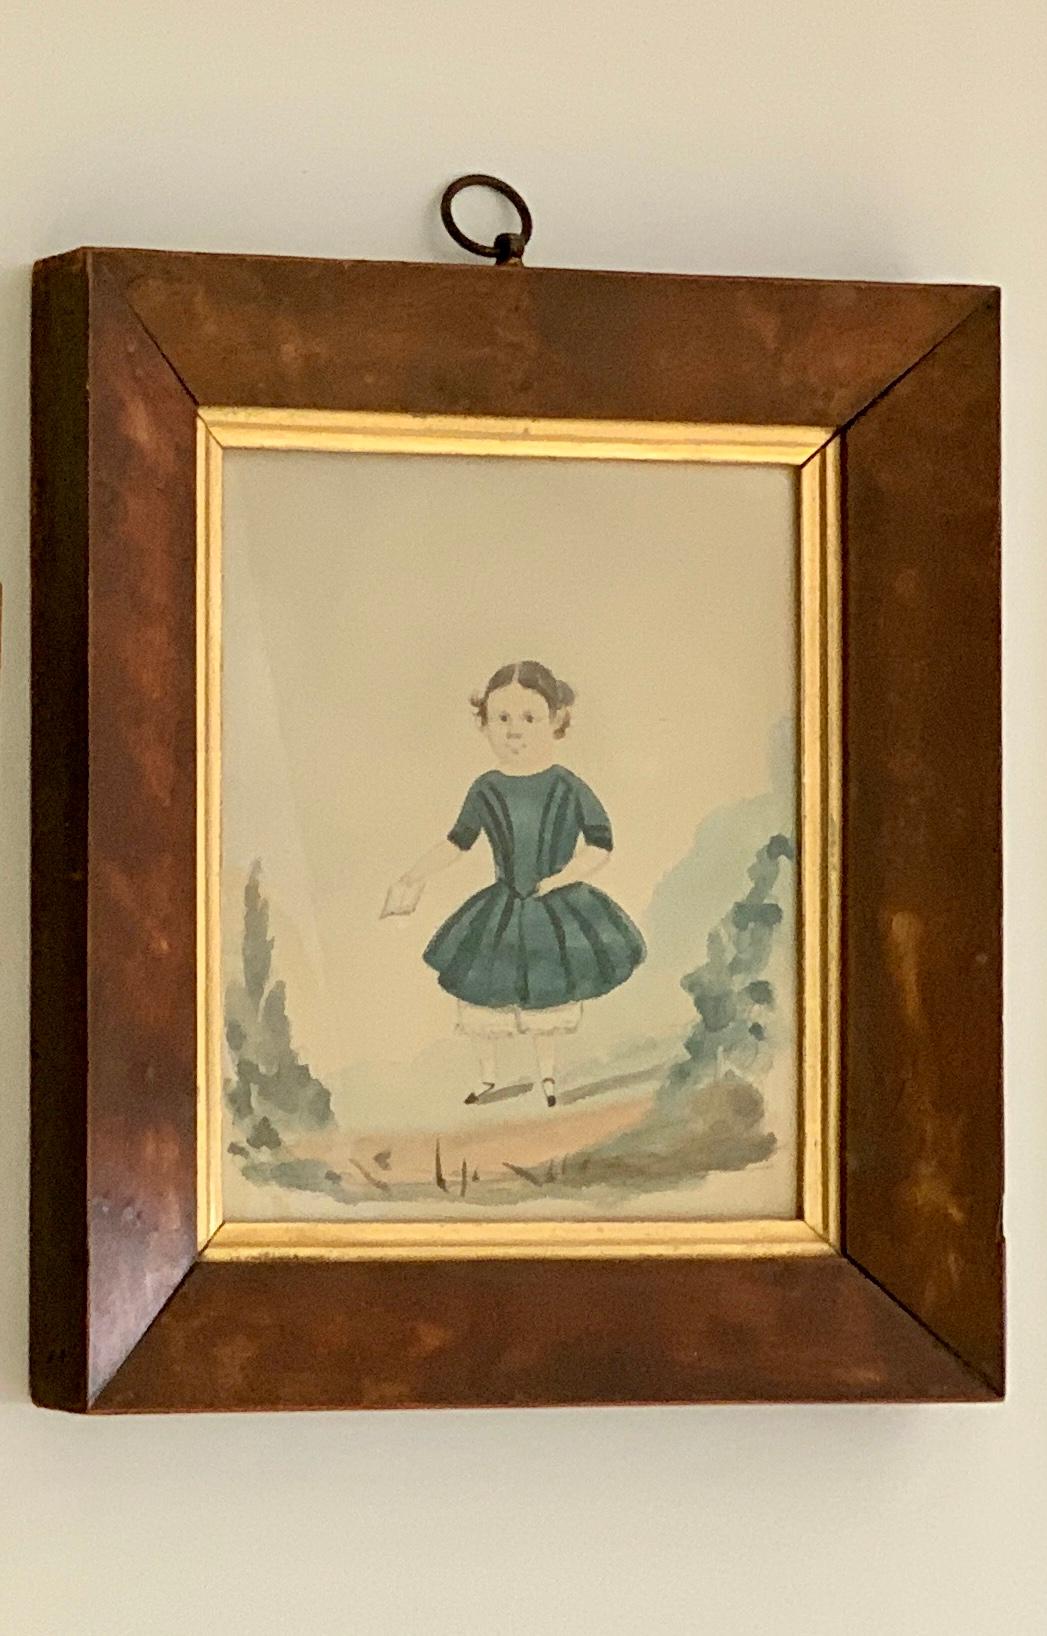 Three hand painted watercolor portraits of little girls.
These watercolor portraits each capture that girl's unique personality and expression. 
Painted by skilled portrait artists of the mid-19th-century English School, they exemplify the